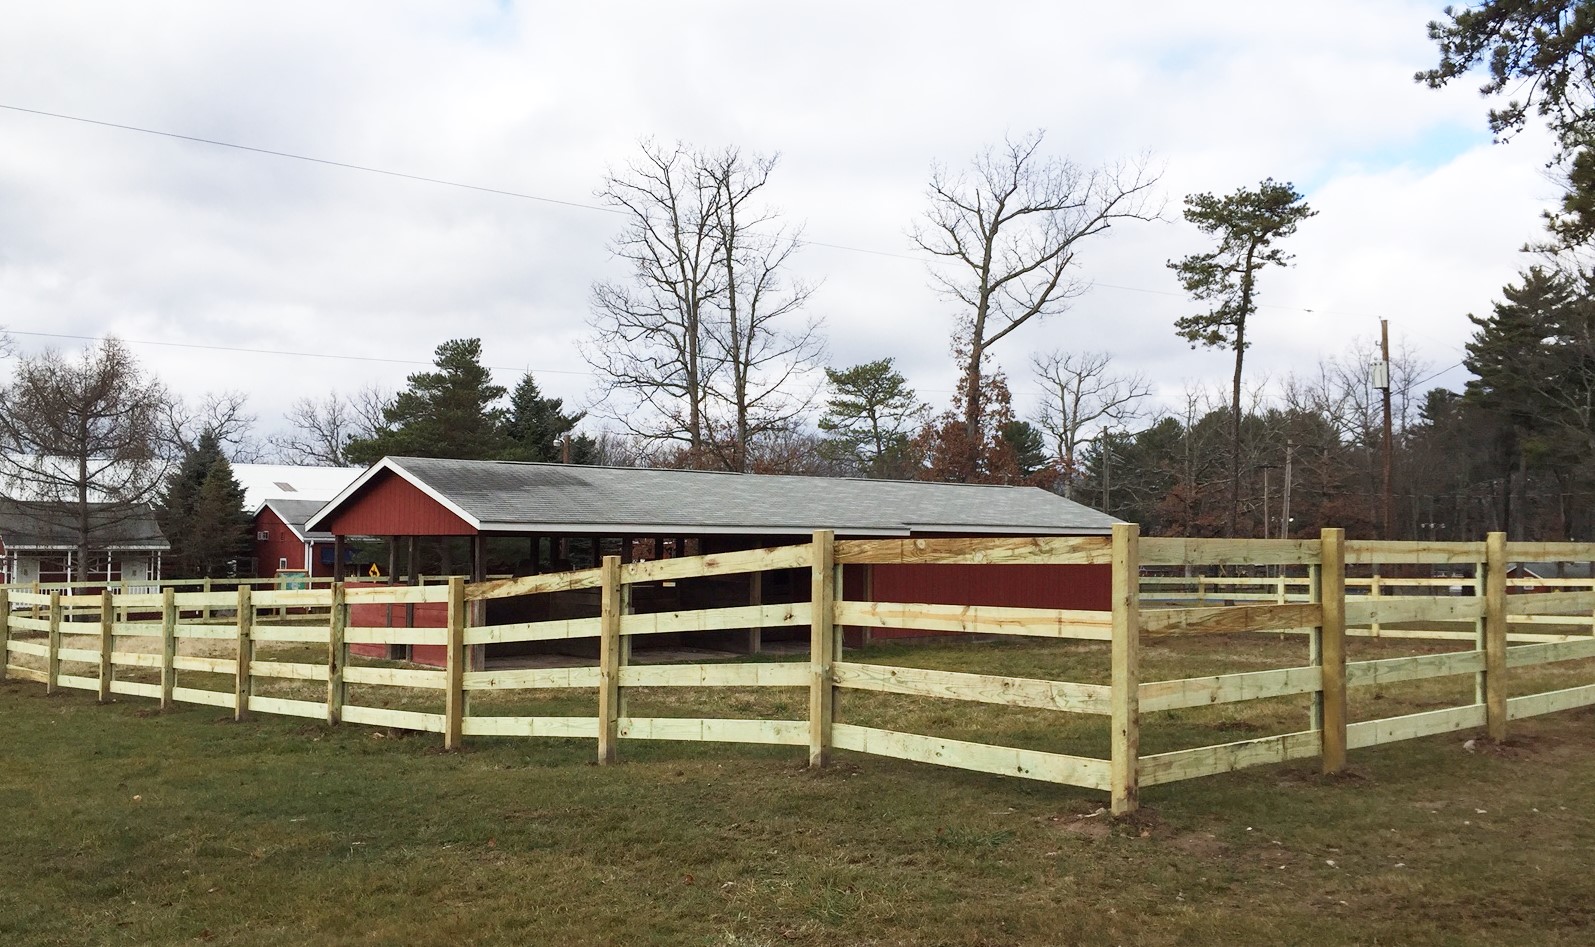 A new stable fence for the horses.